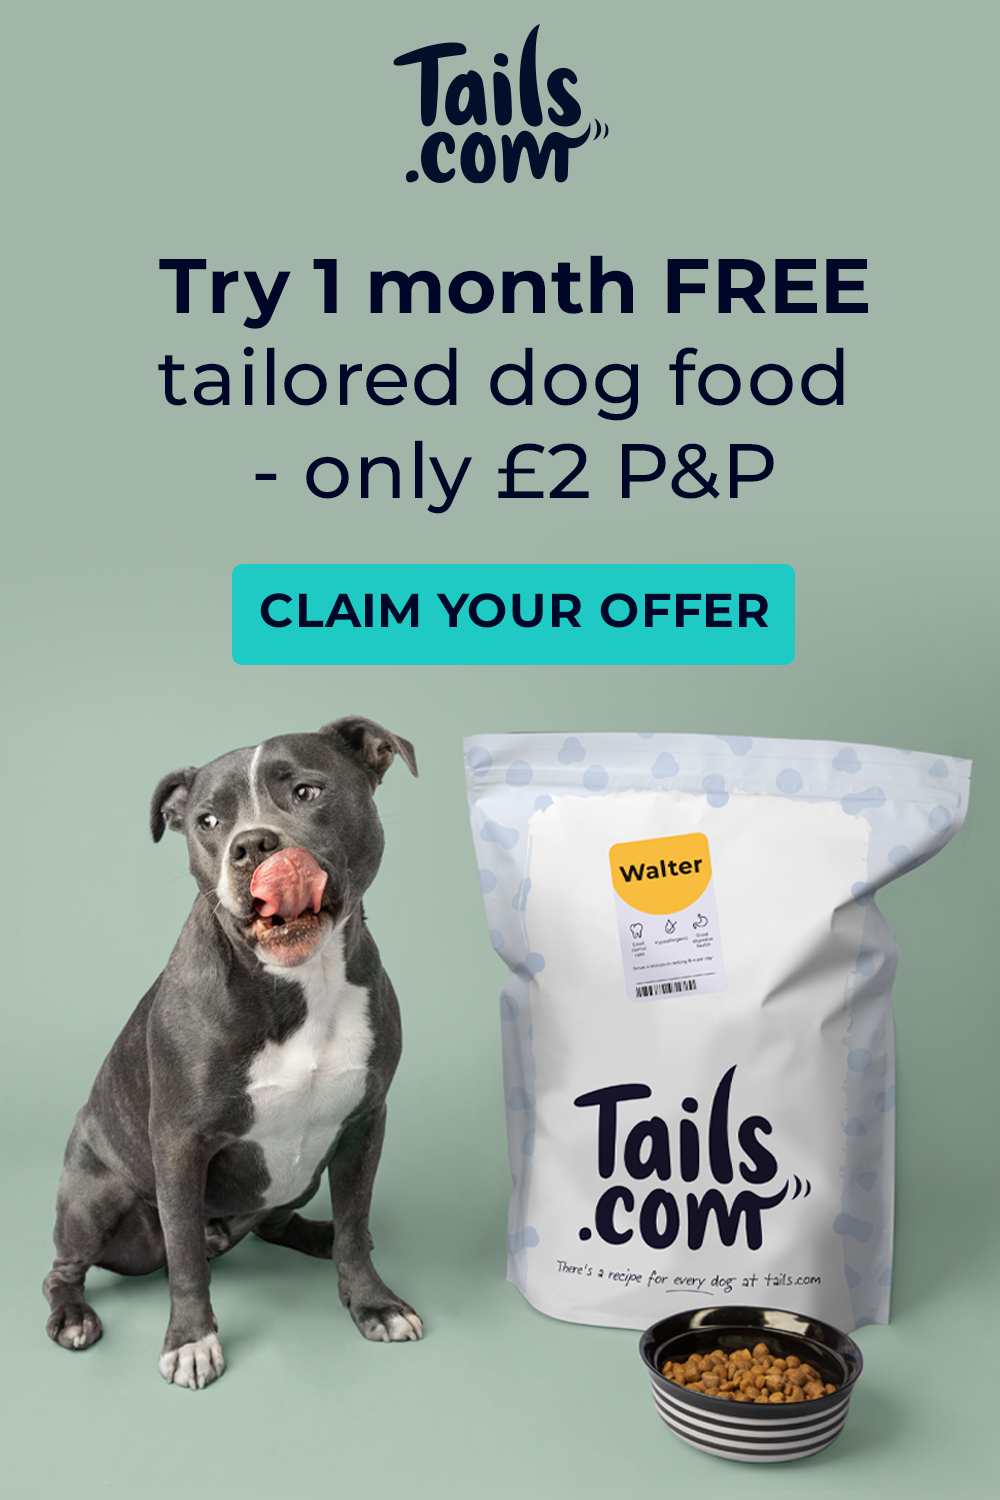 Tails Offer 100% Off first order